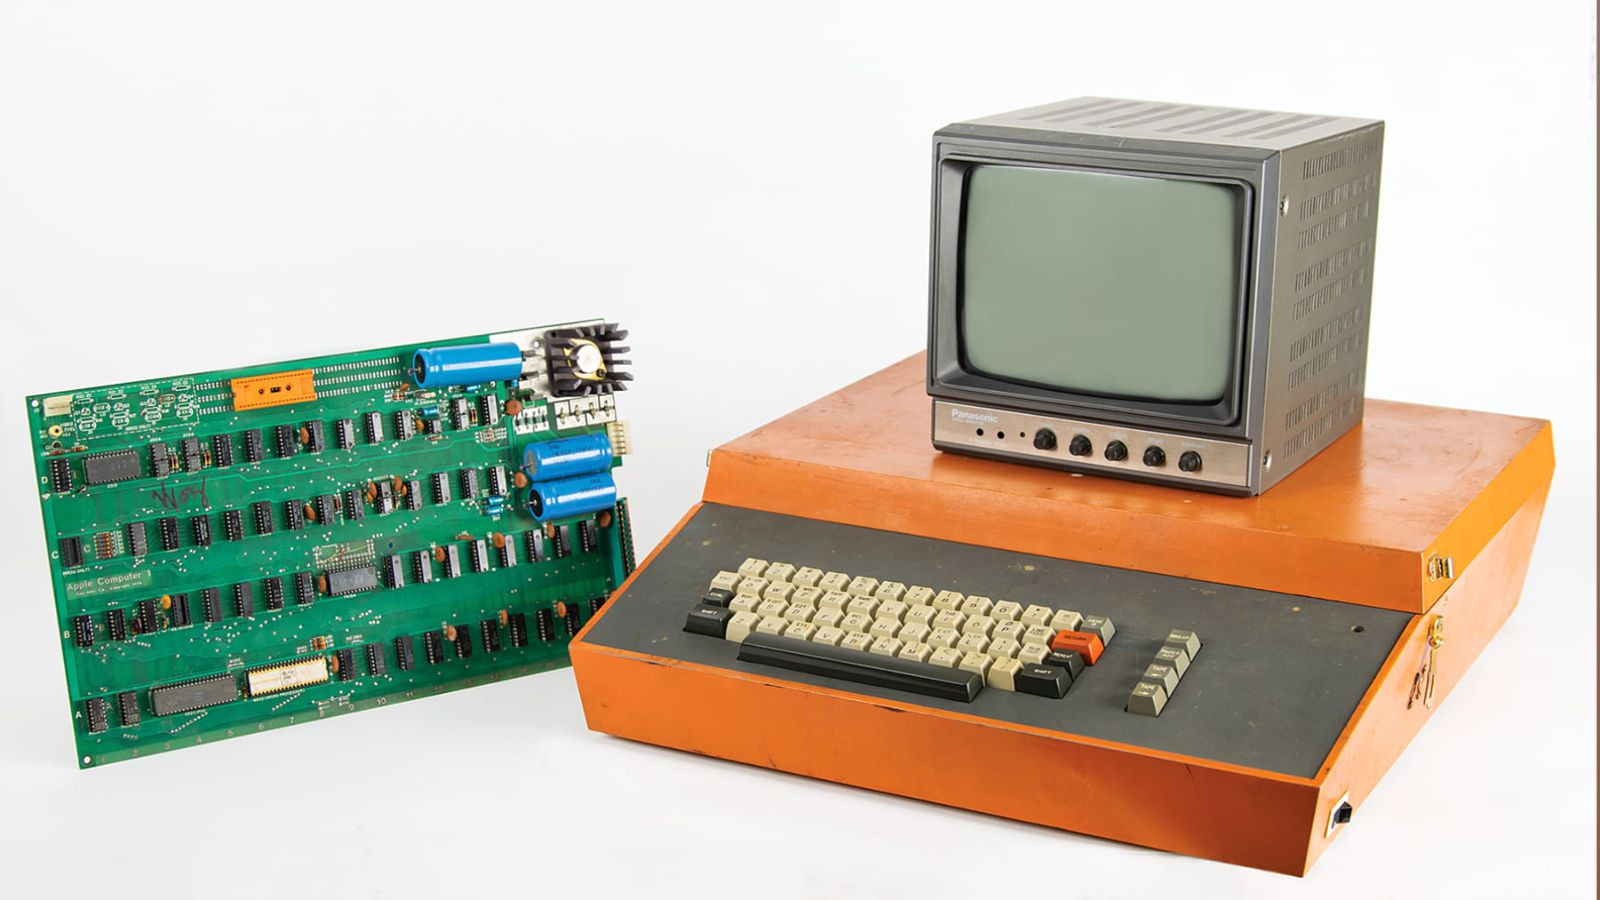 This 1977 Apple-1 computer is up for auction for 